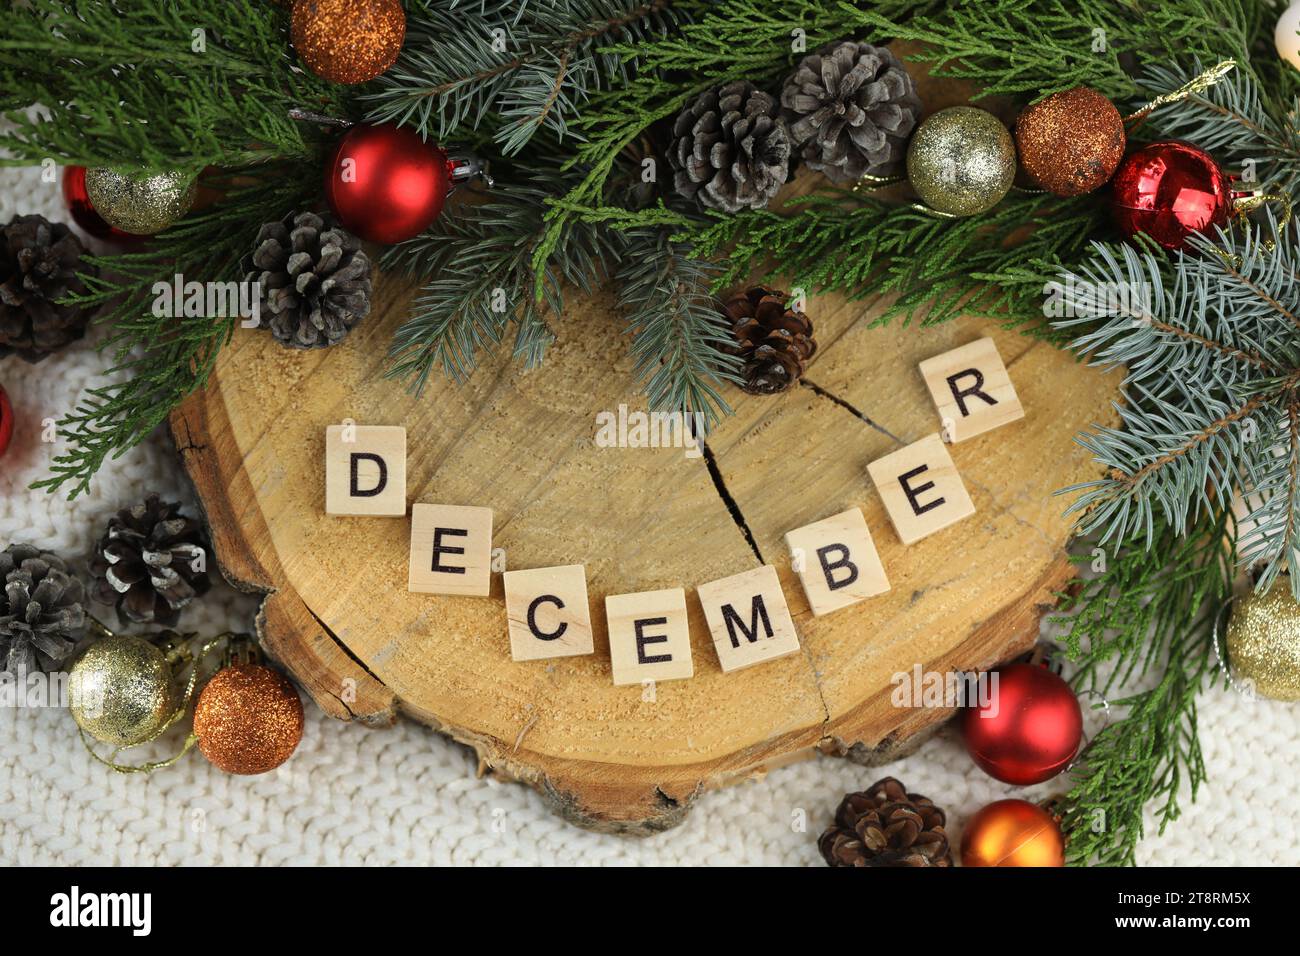 Wooden background with christmas decoration and text Stock Photo